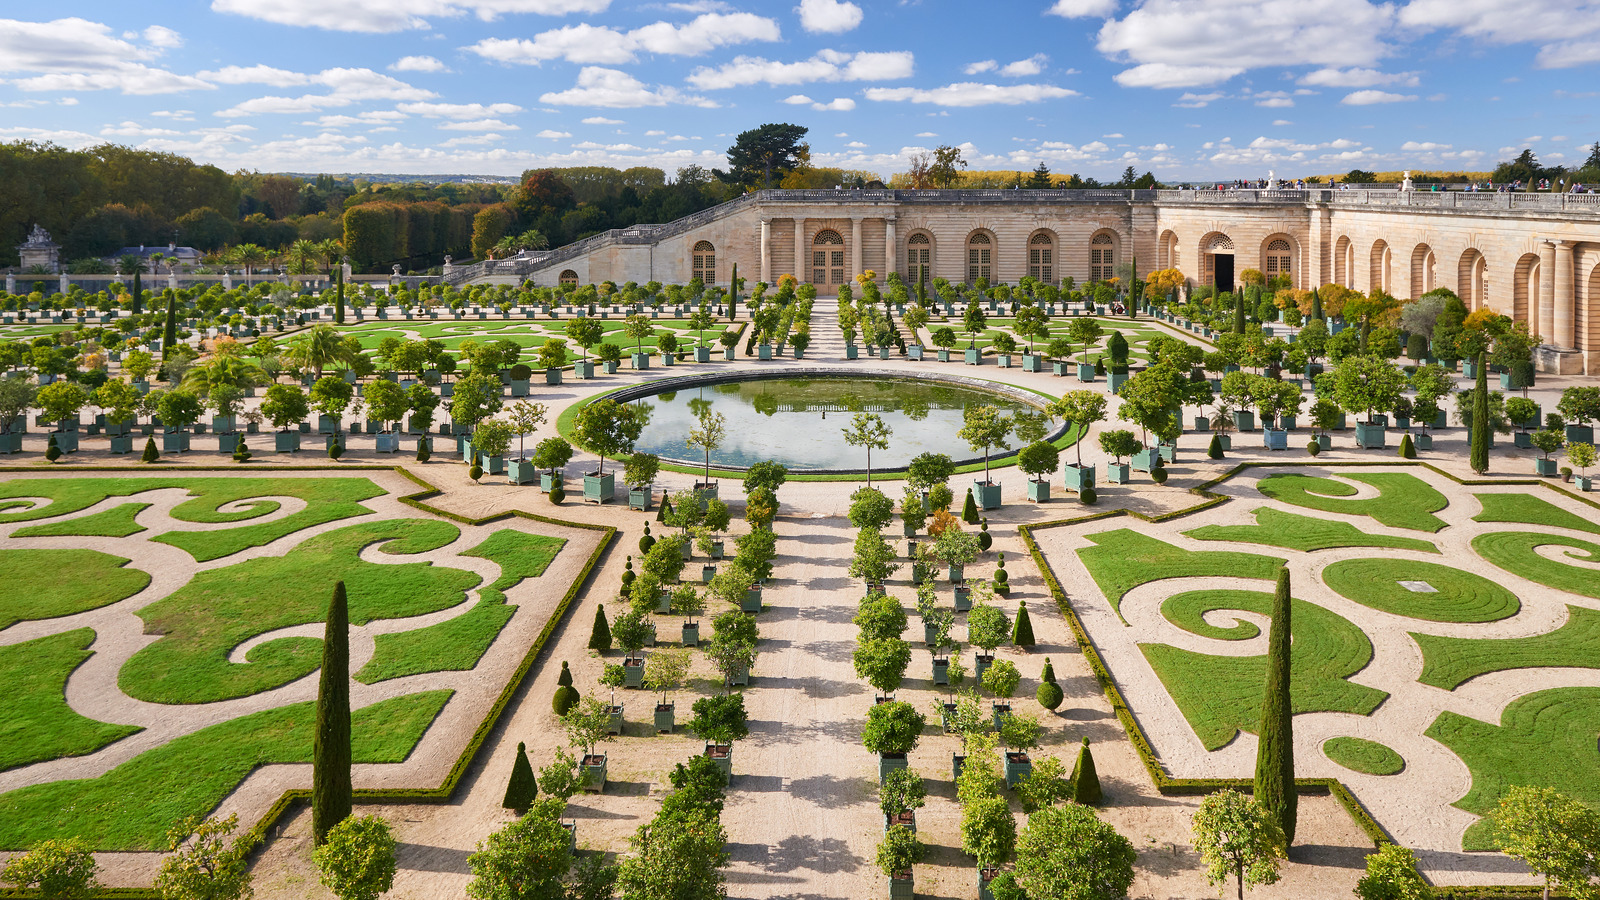 https://www.grunge.com/img/gallery/the-surprising-amount-of-time-it-took-to-build-the-palace-of-versailles-gardens/l-intro-1623788208.jpg